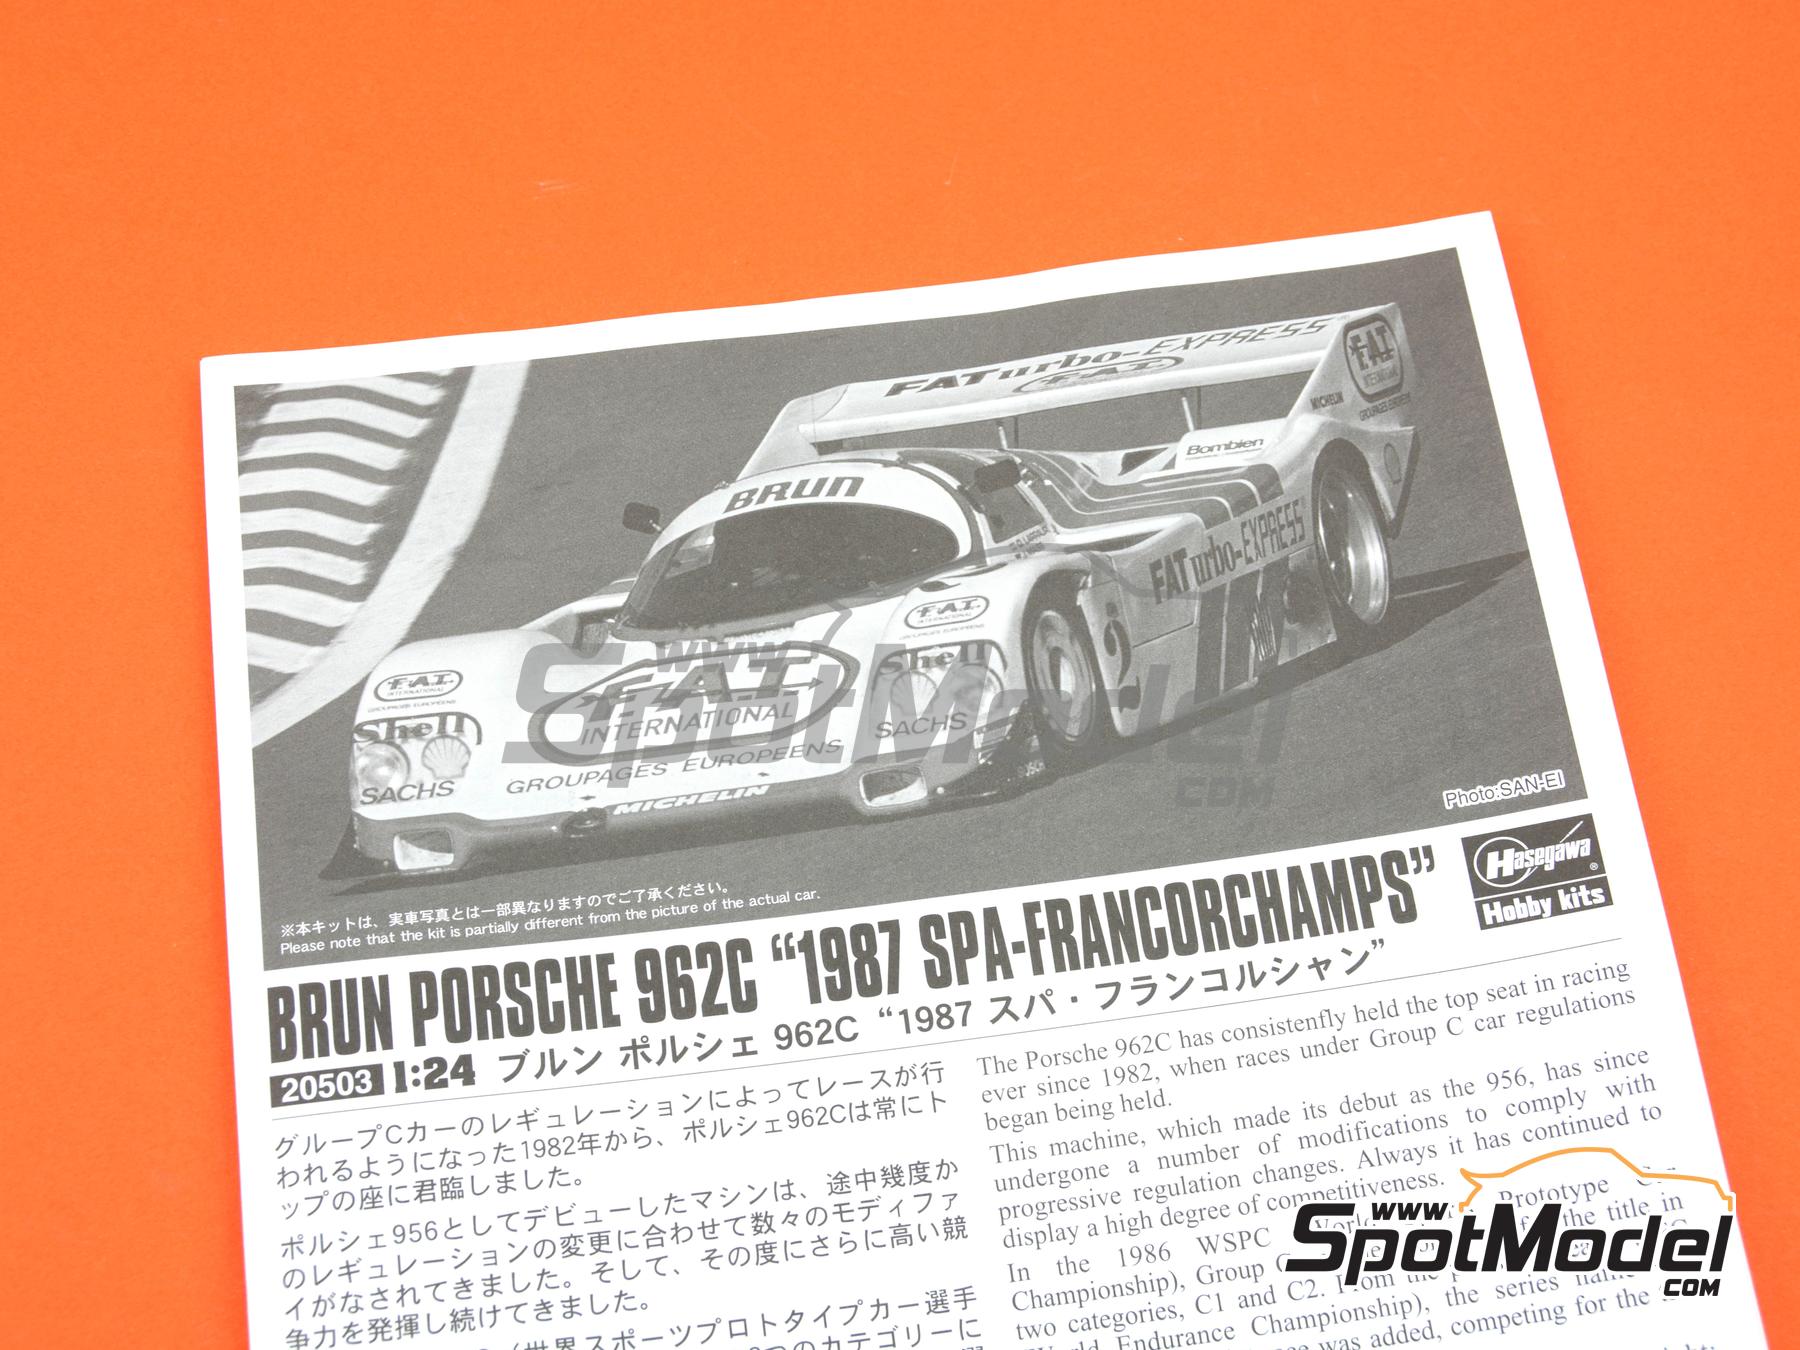 Hasegawa 20294 From a Porsche 962c 1/24 Scale Kit for sale online 